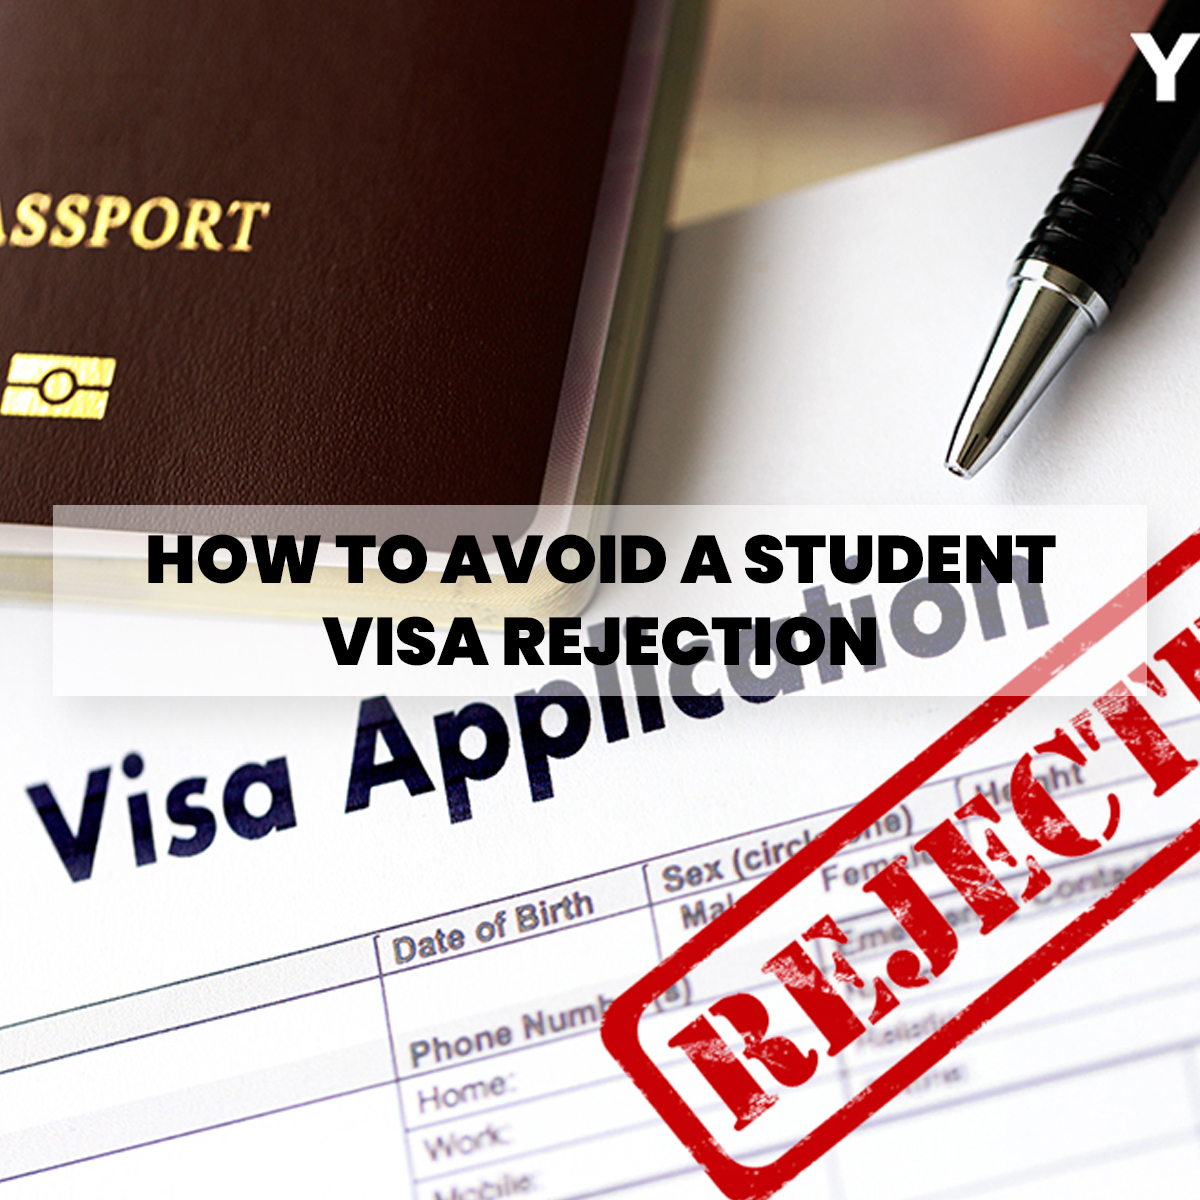 How to Avoid a Student Visa Rejection - Study Abroad